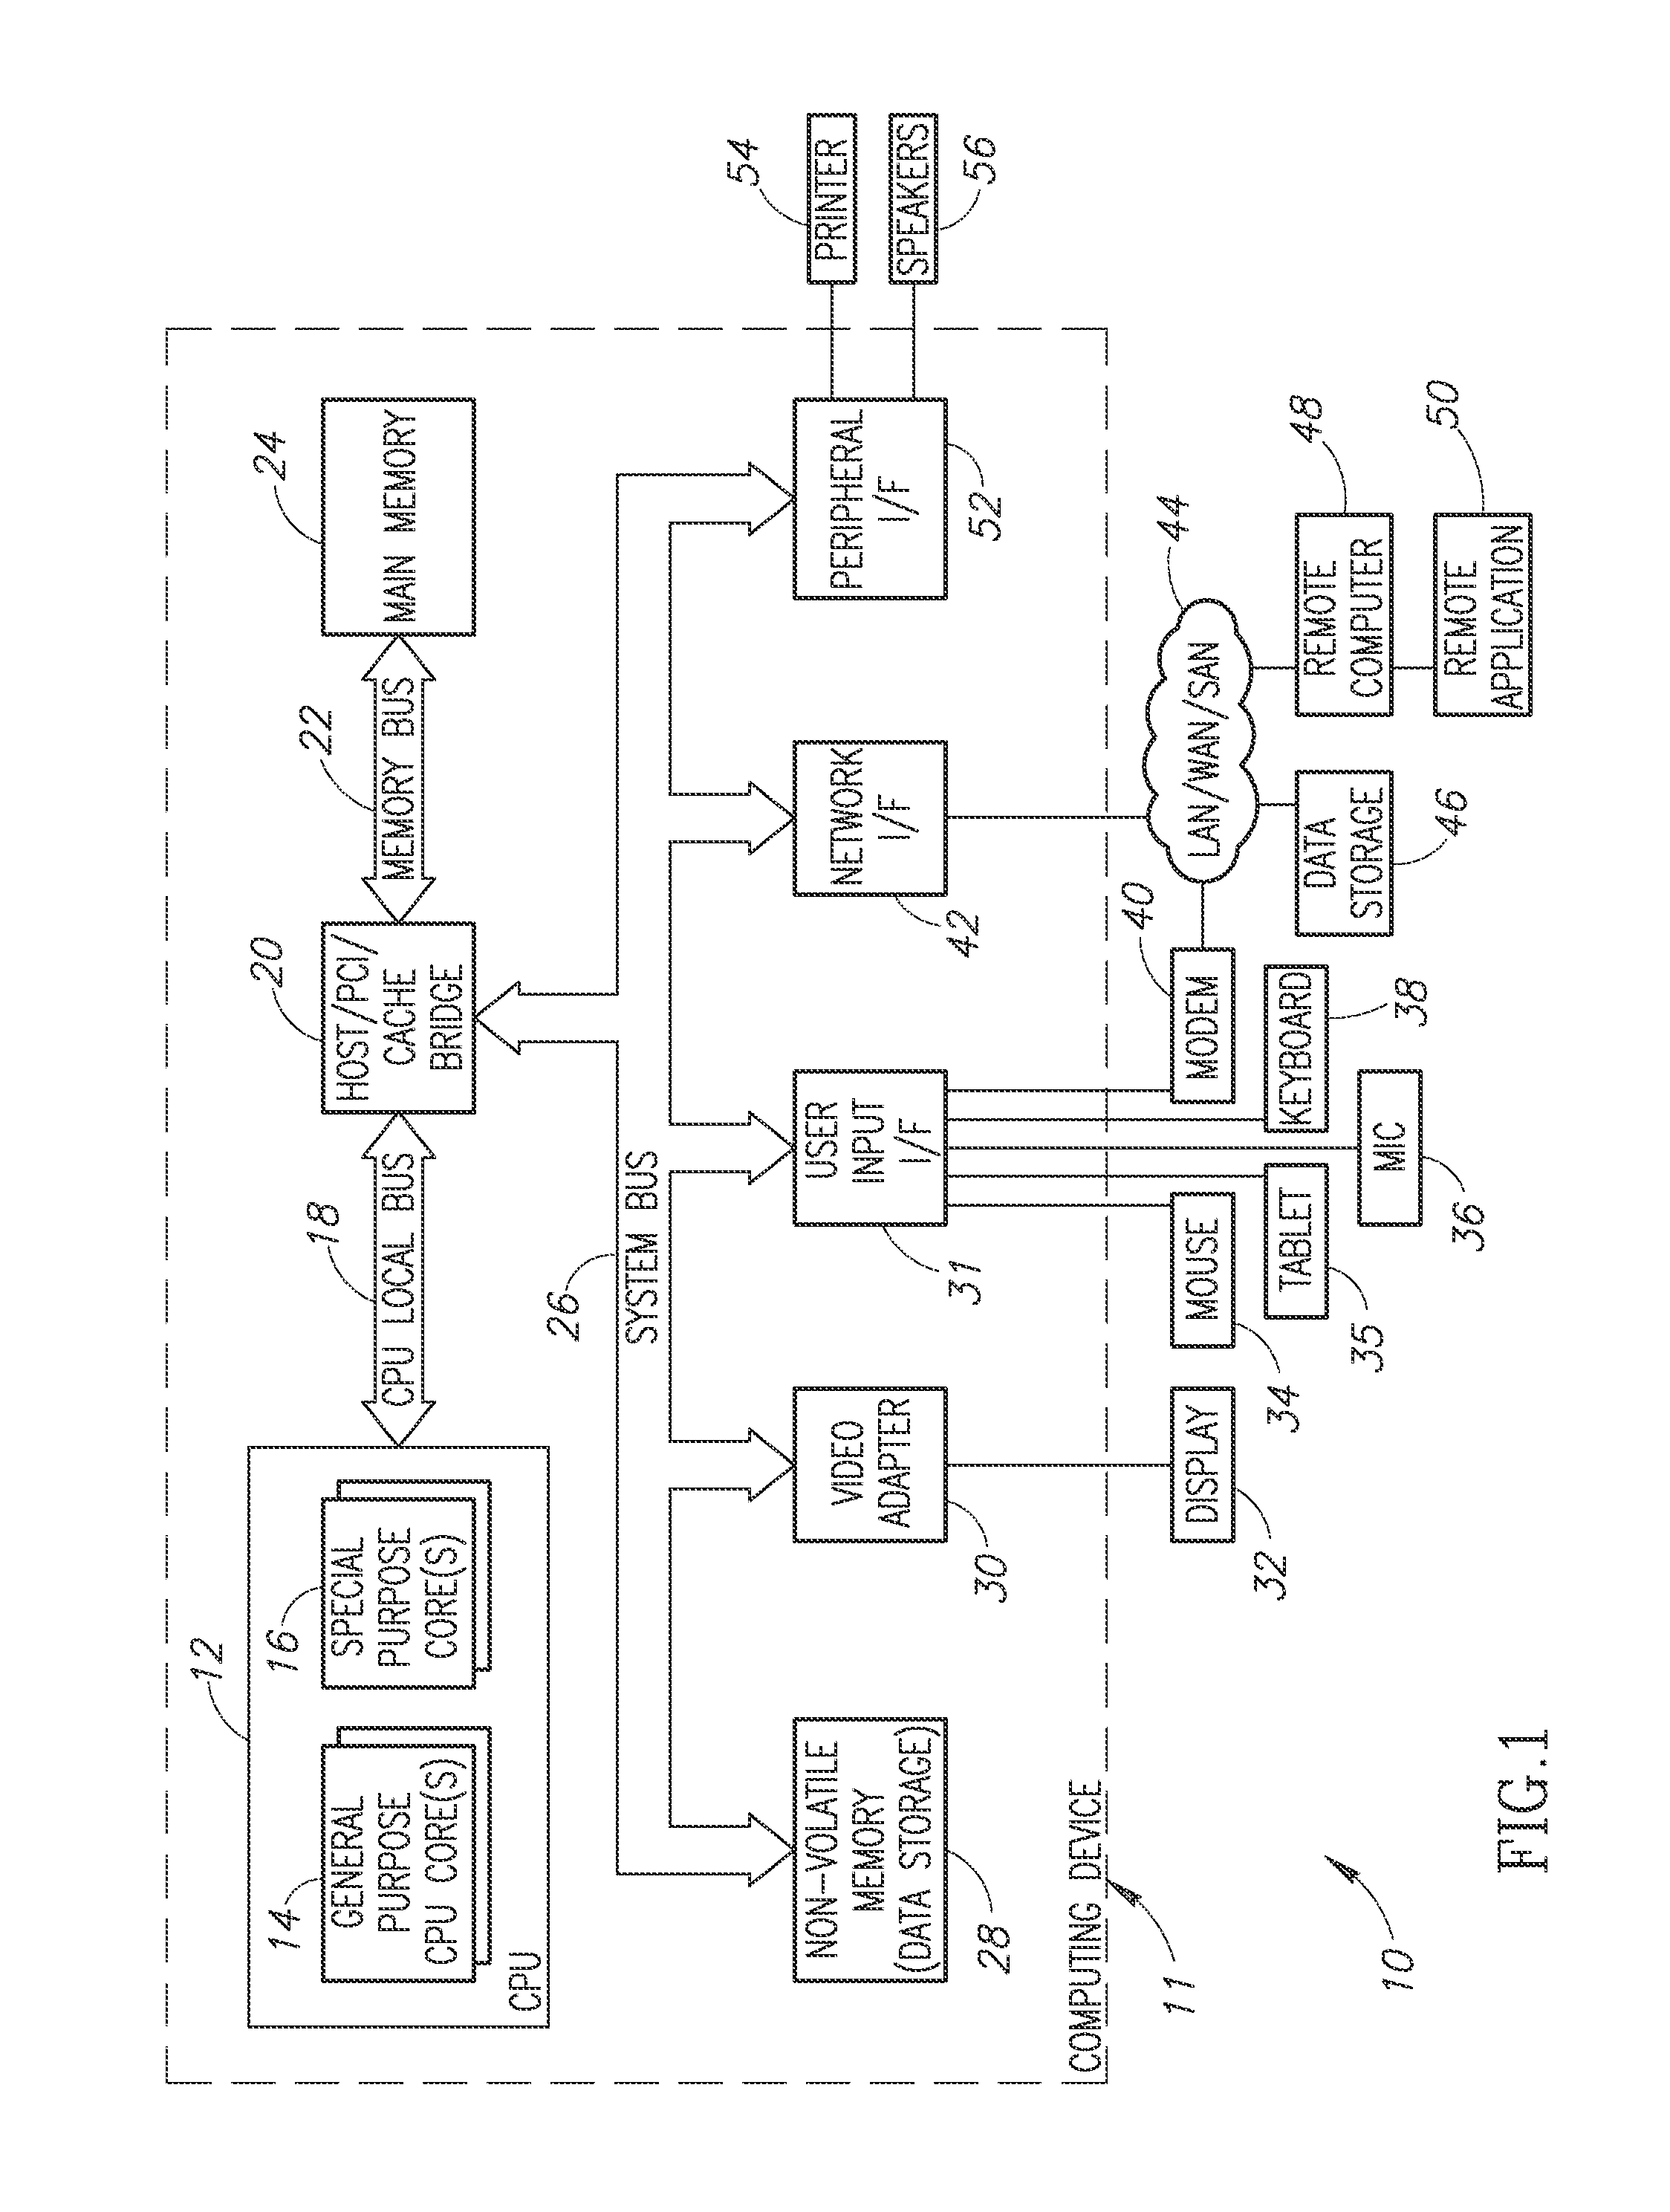 System and method of distributed event based digital image collection, organization and sharing